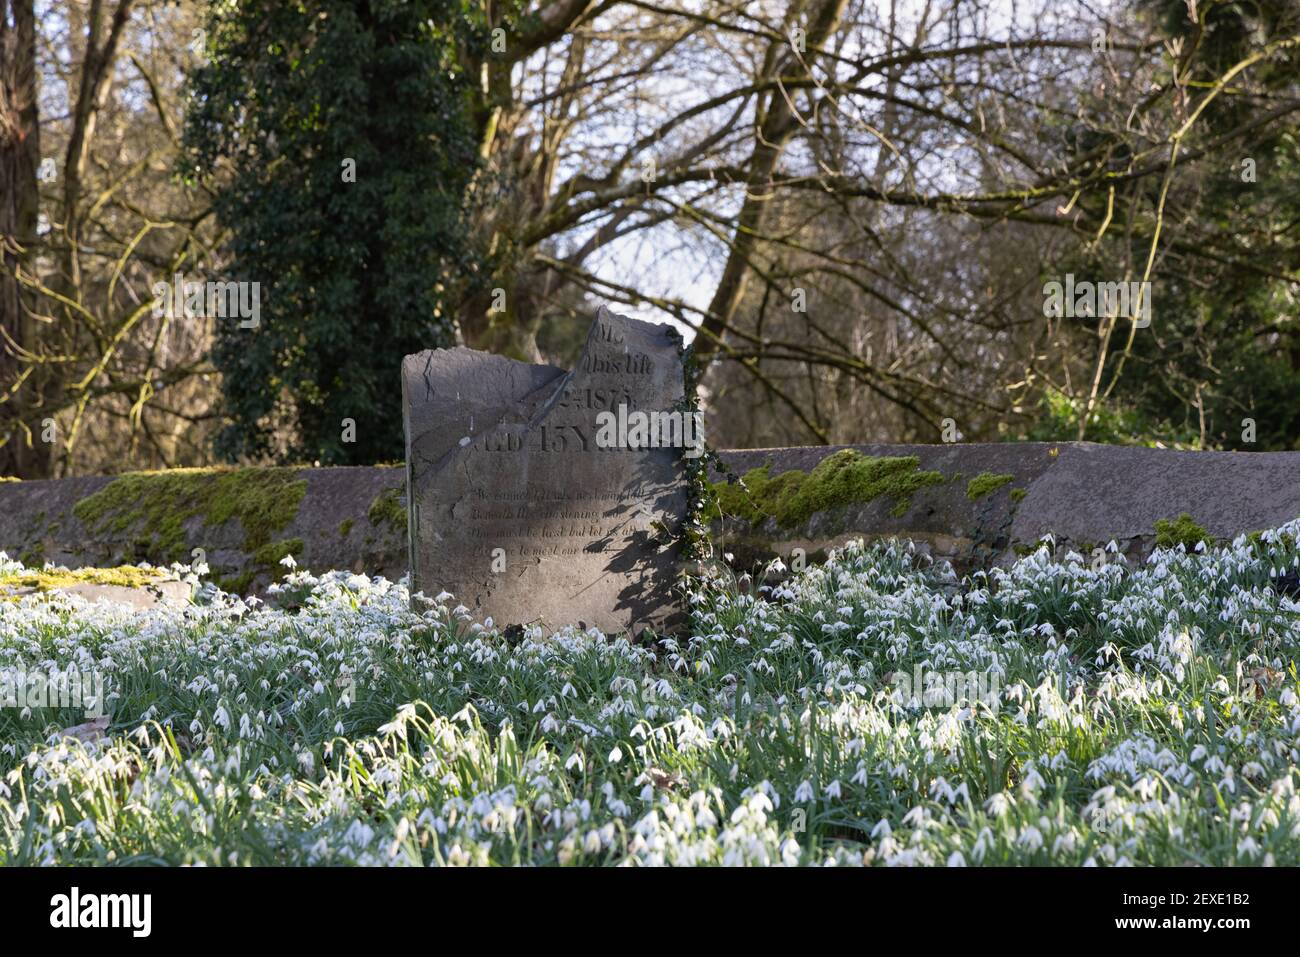 Weedon, Northamptonshire, UK - February 25th 2021: A broken slate gravestone with ivy growing up it stands surrounded by snowdrops in a churchyard. Stock Photo